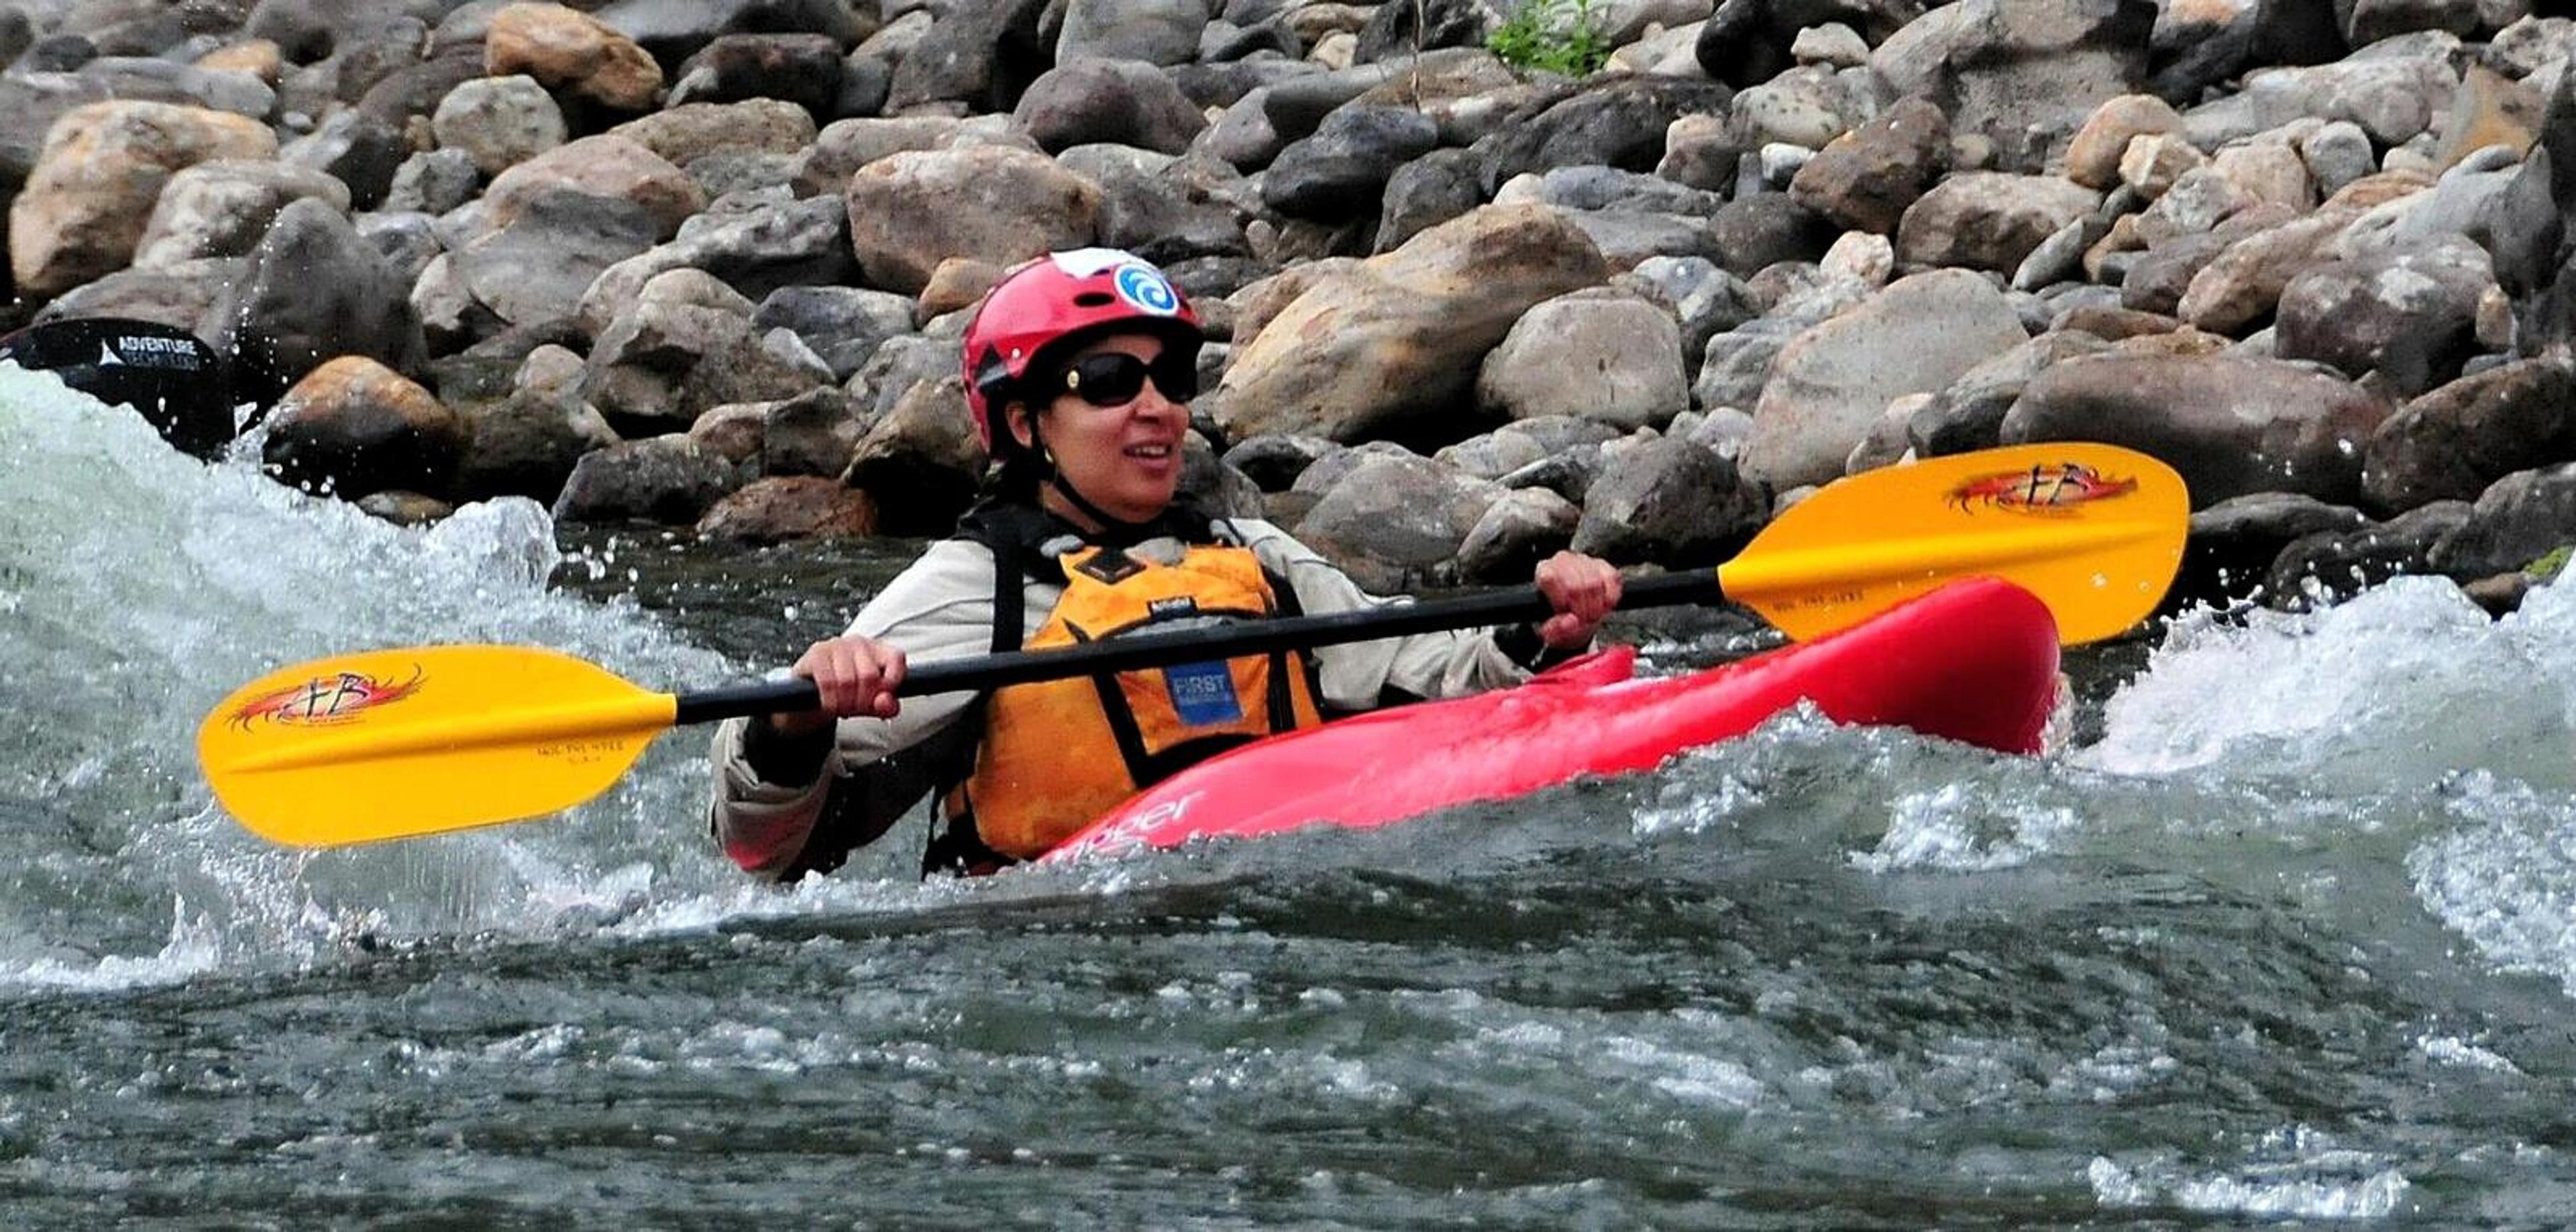 The author on a whitewater kayaking trip.